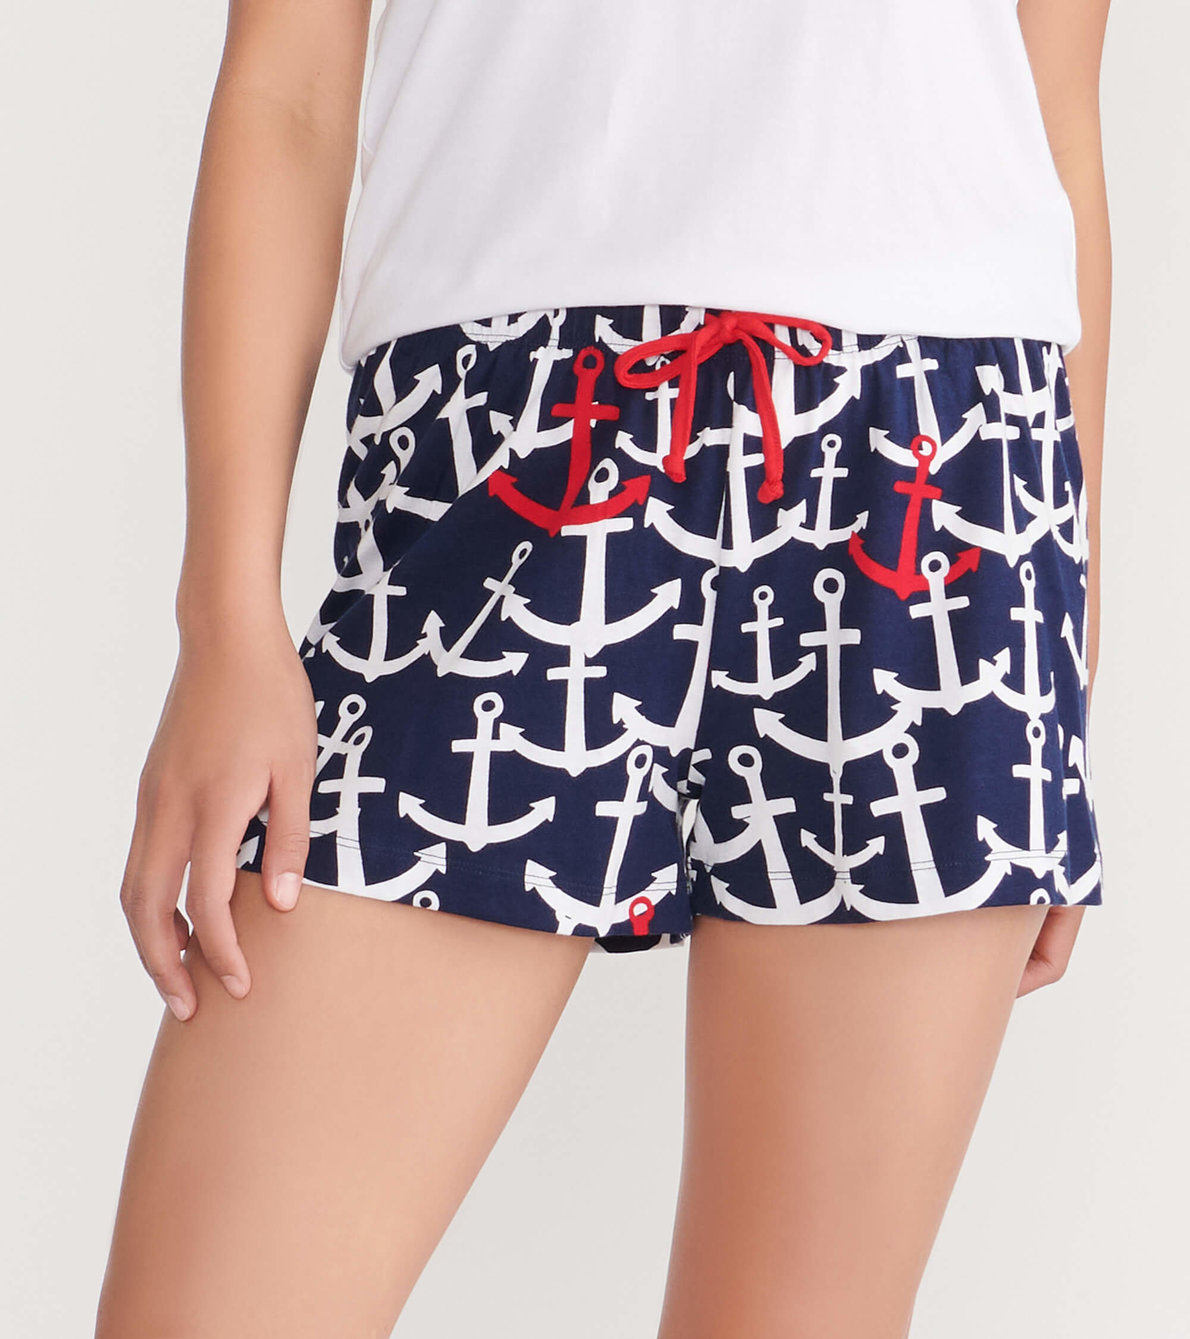 View larger image of Red and White Anchors Women's Sleep Shorts